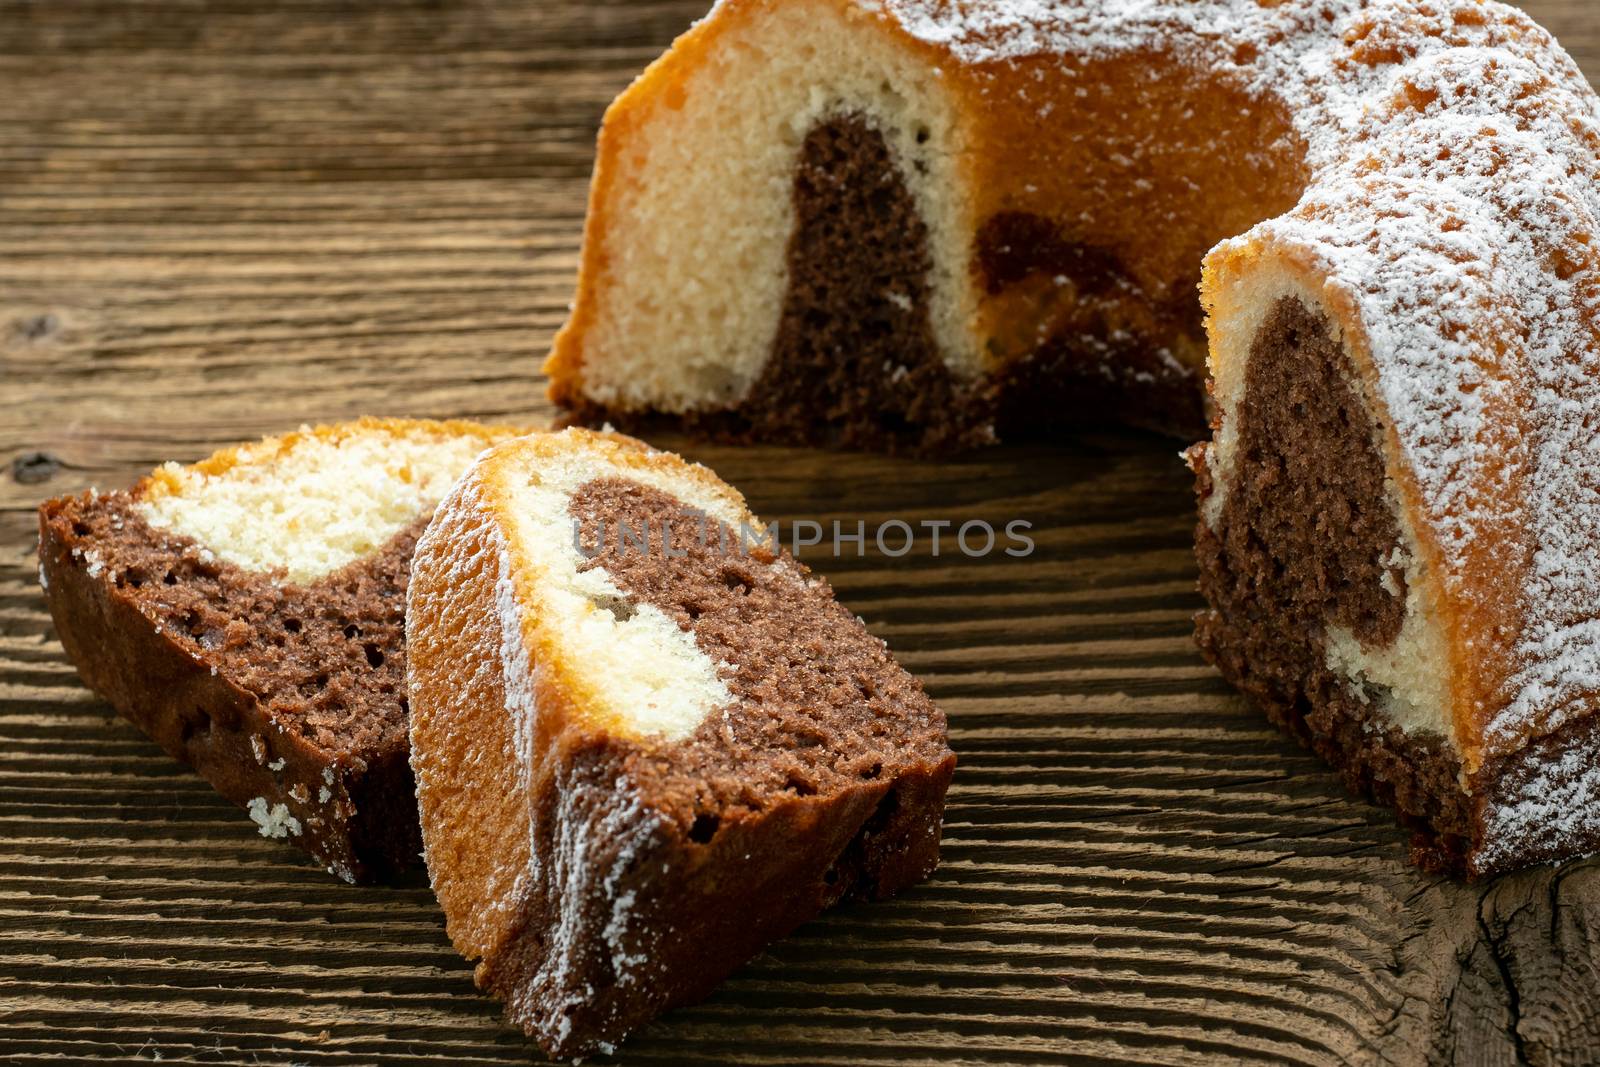 Traditional homemade marble cake. Sliced marble bundt cake on wooden table